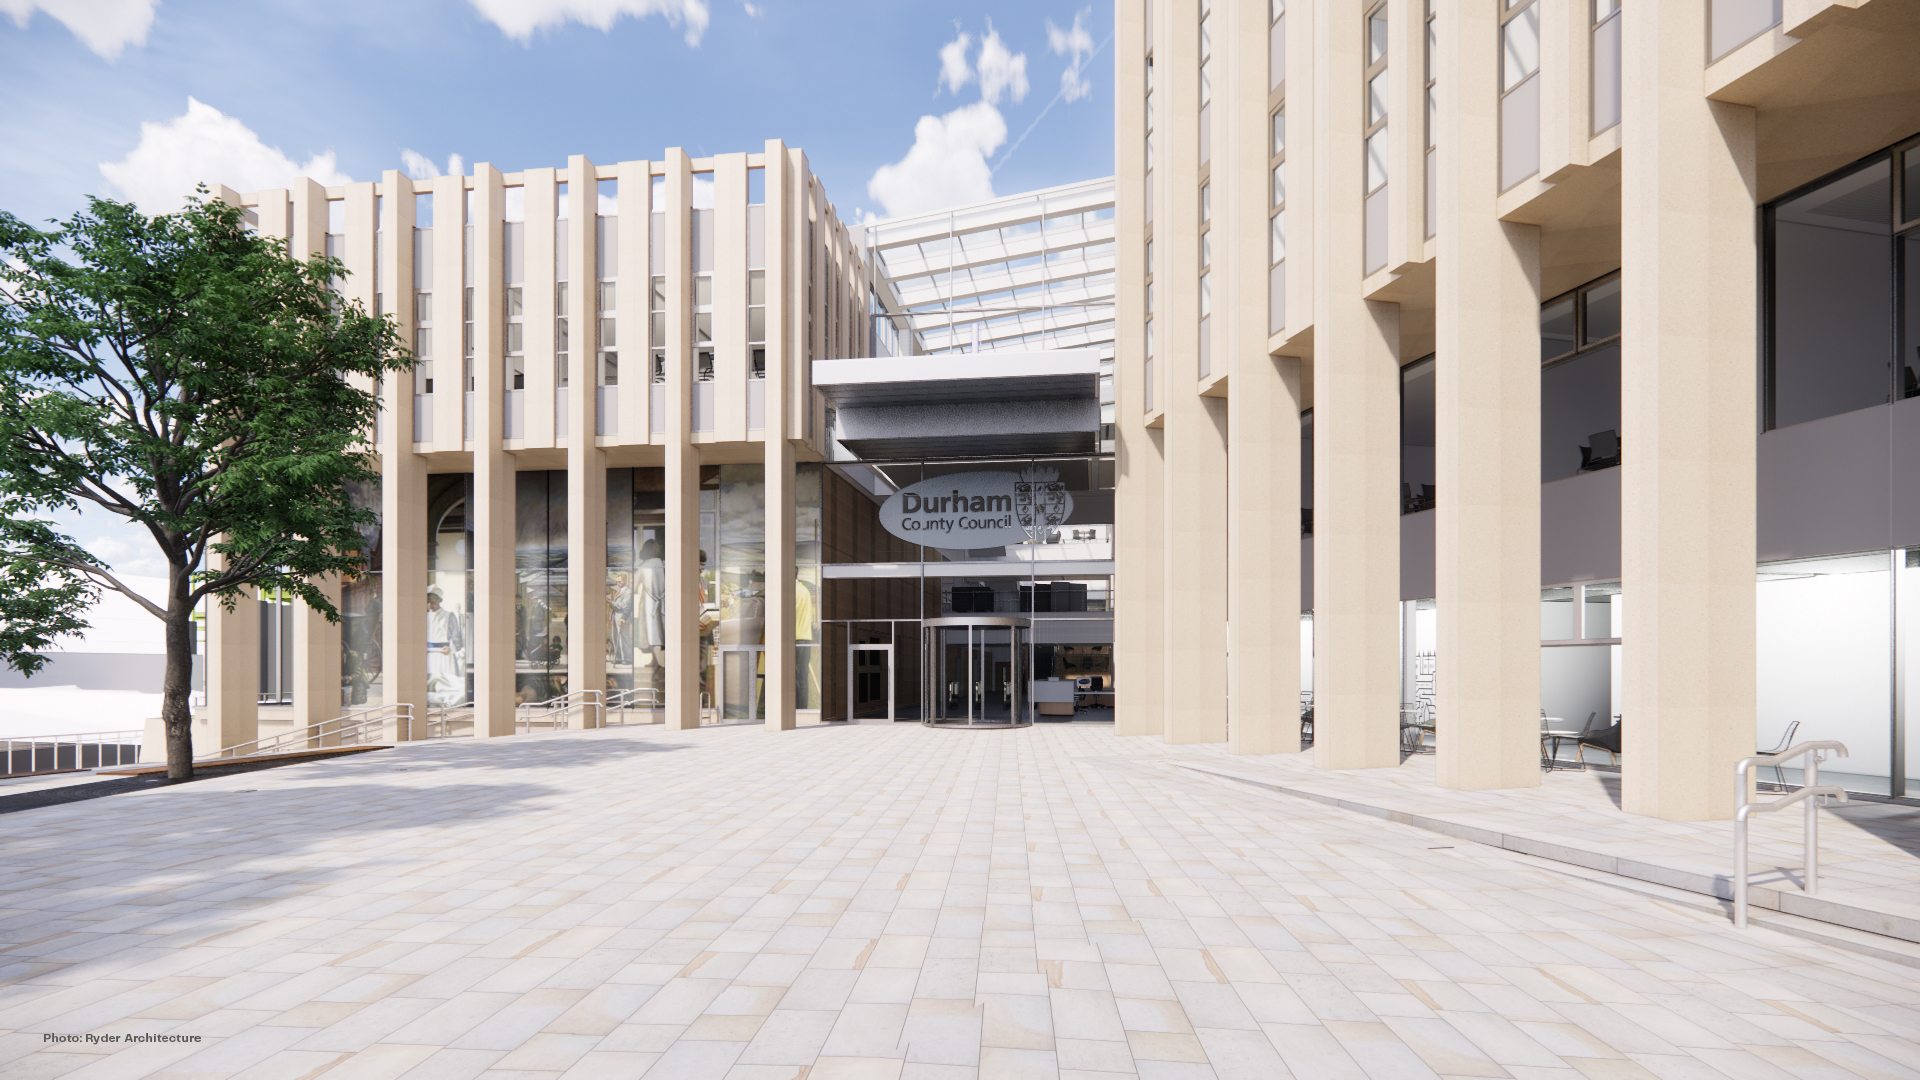 Durham County Council HQ maximizes the use of natural ventilation